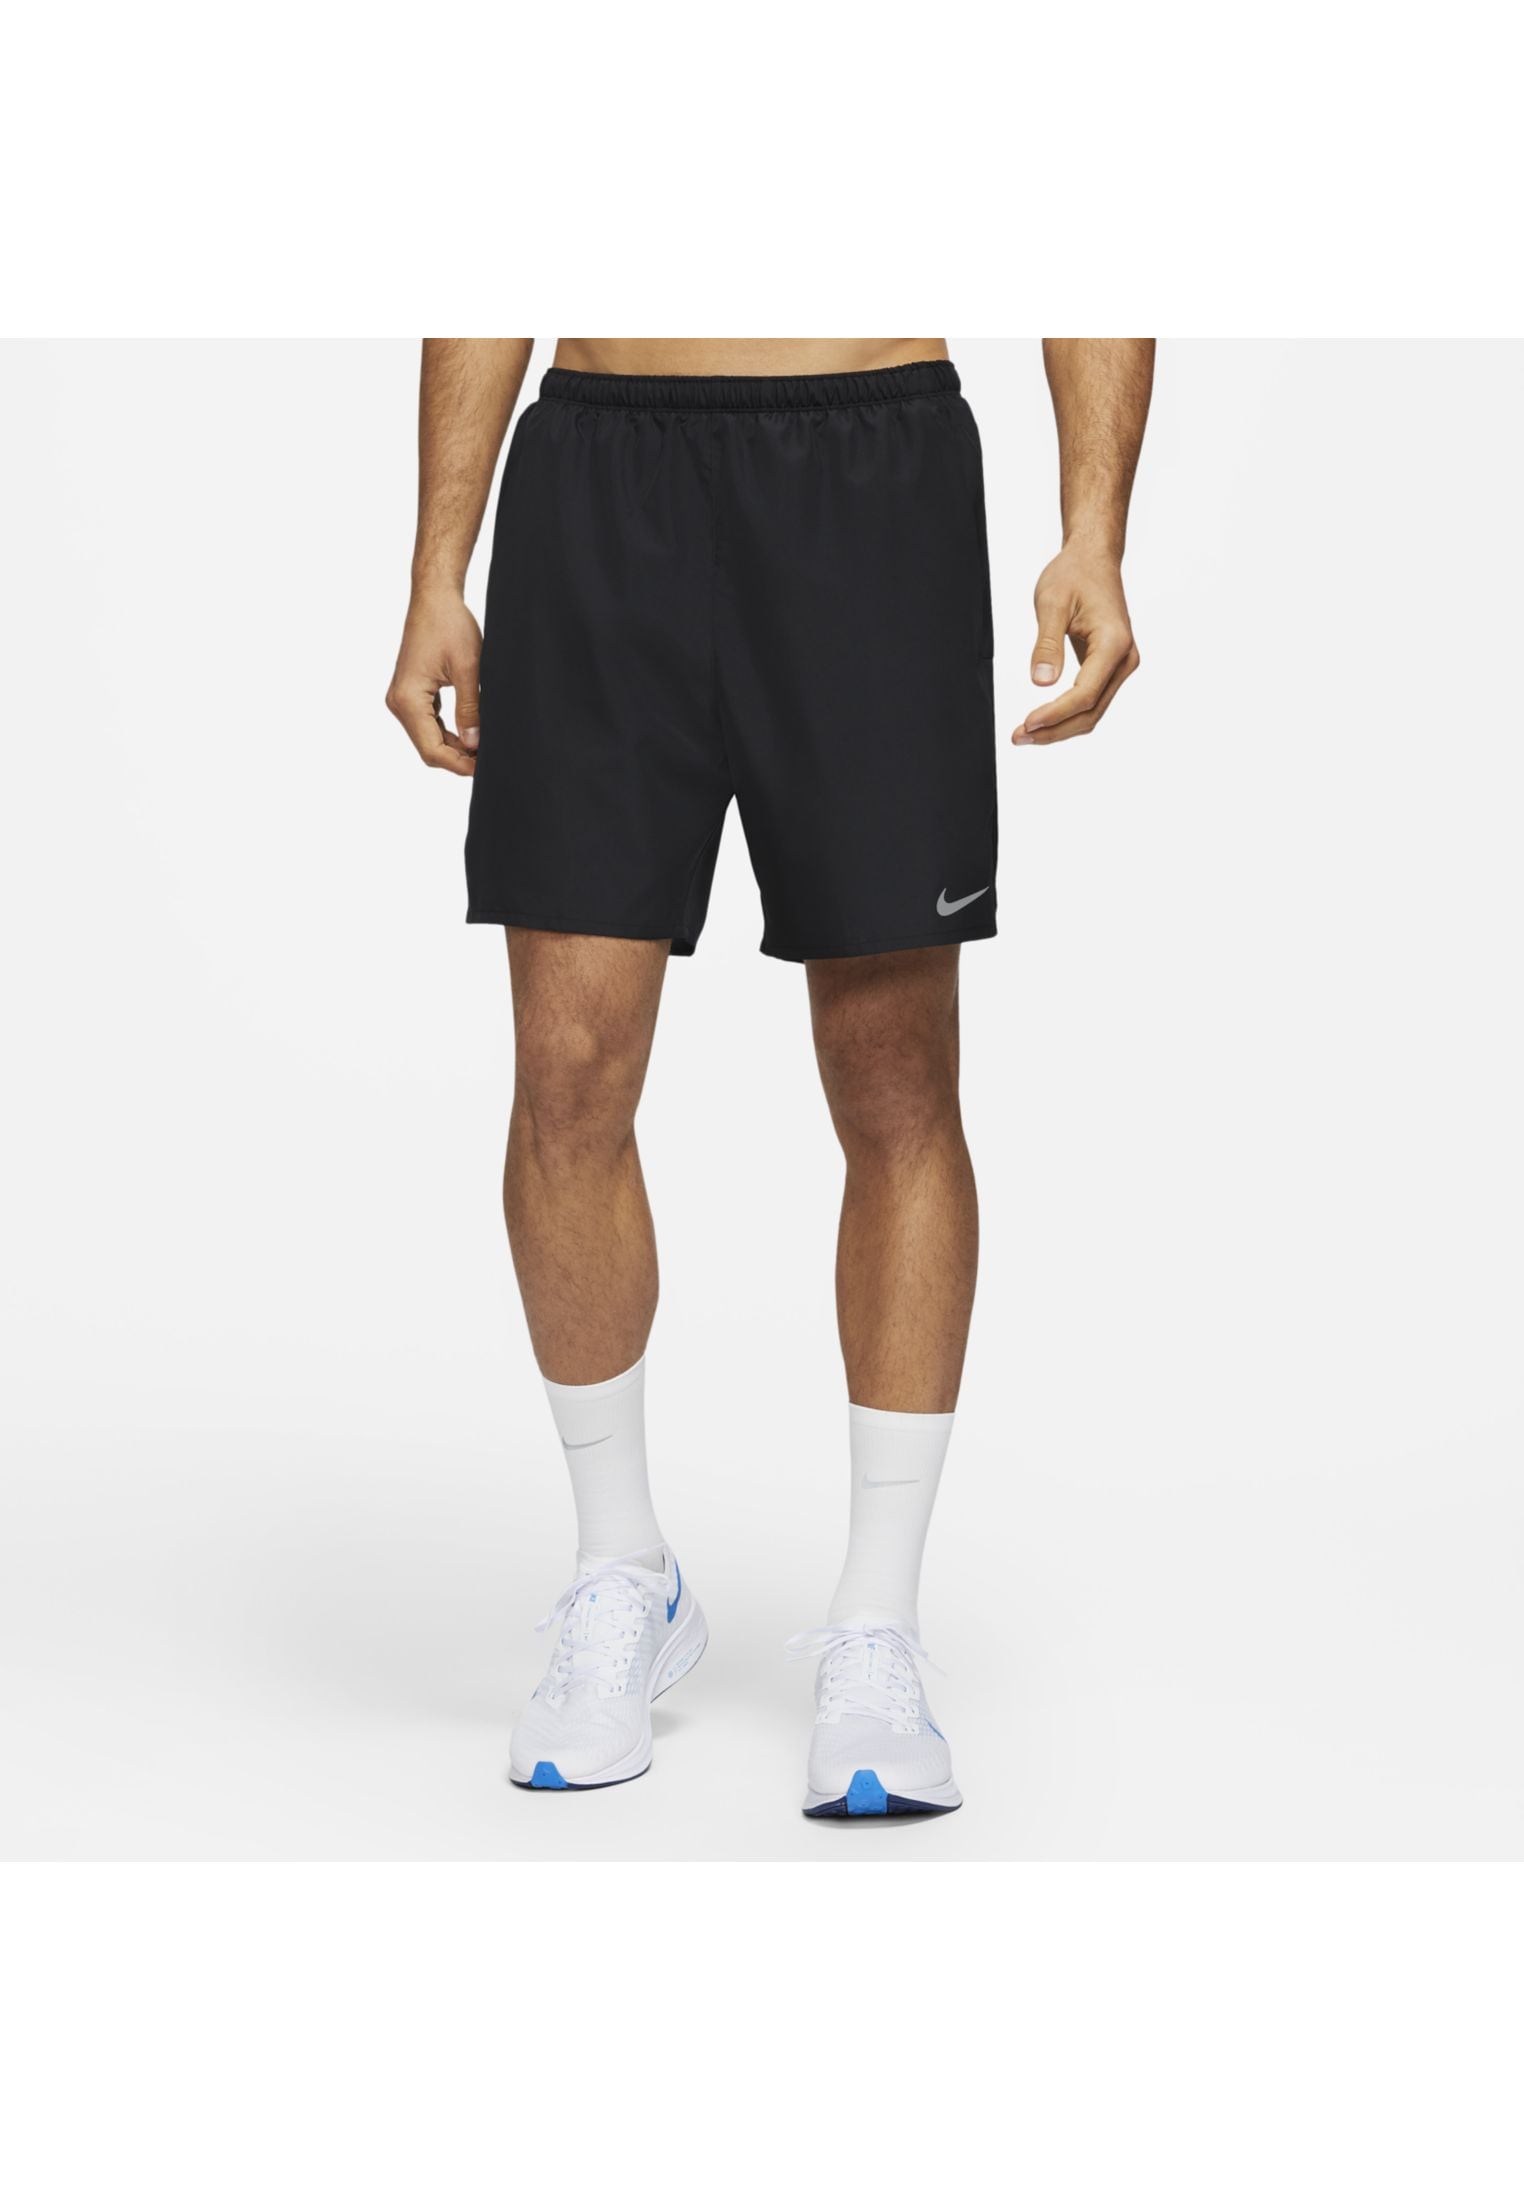 Nike Challenger 2in1 Running Shorts - Game Royal - Mens Clothing | Pro ...